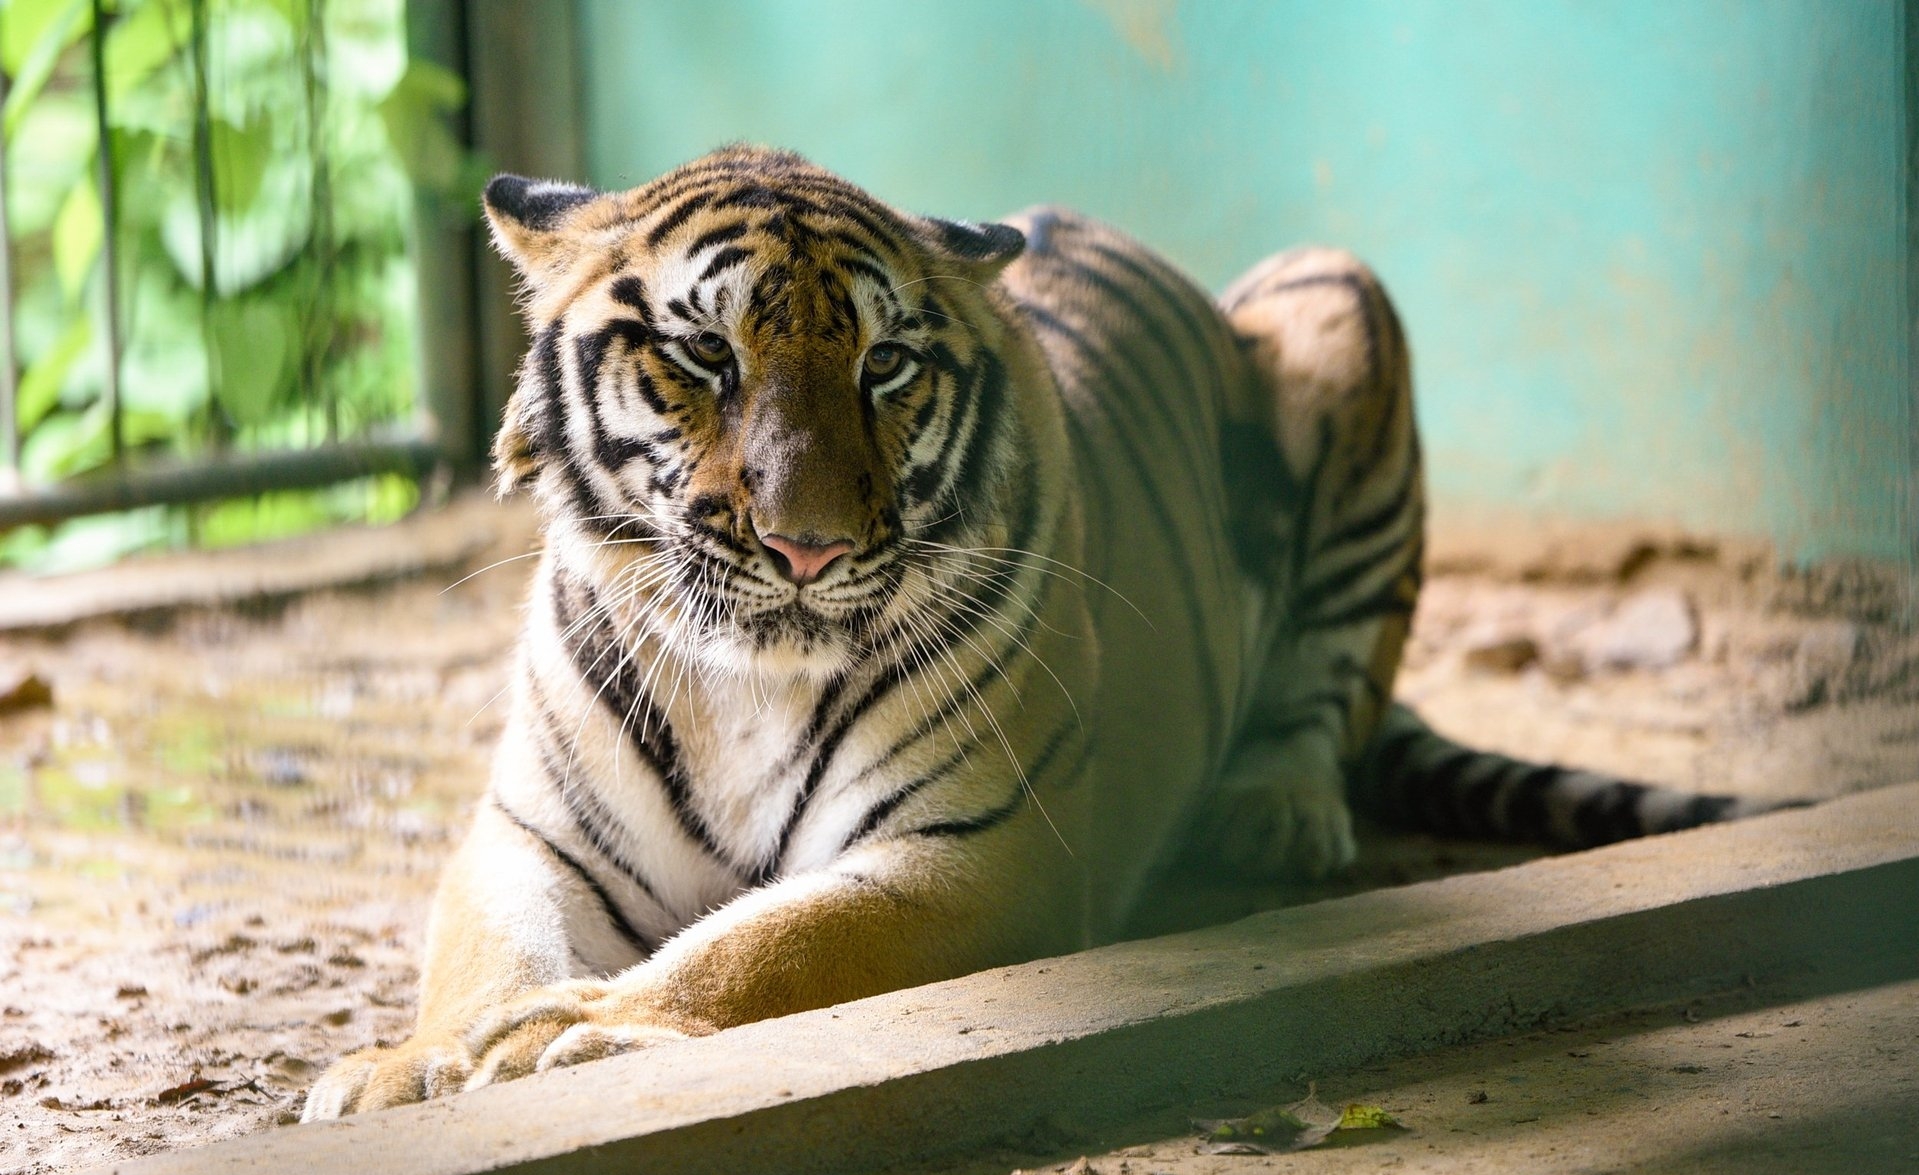 Indochinese tigers are smaller in size than Bengal tigers and Siberian tigers. Photo: Tung Dinh.